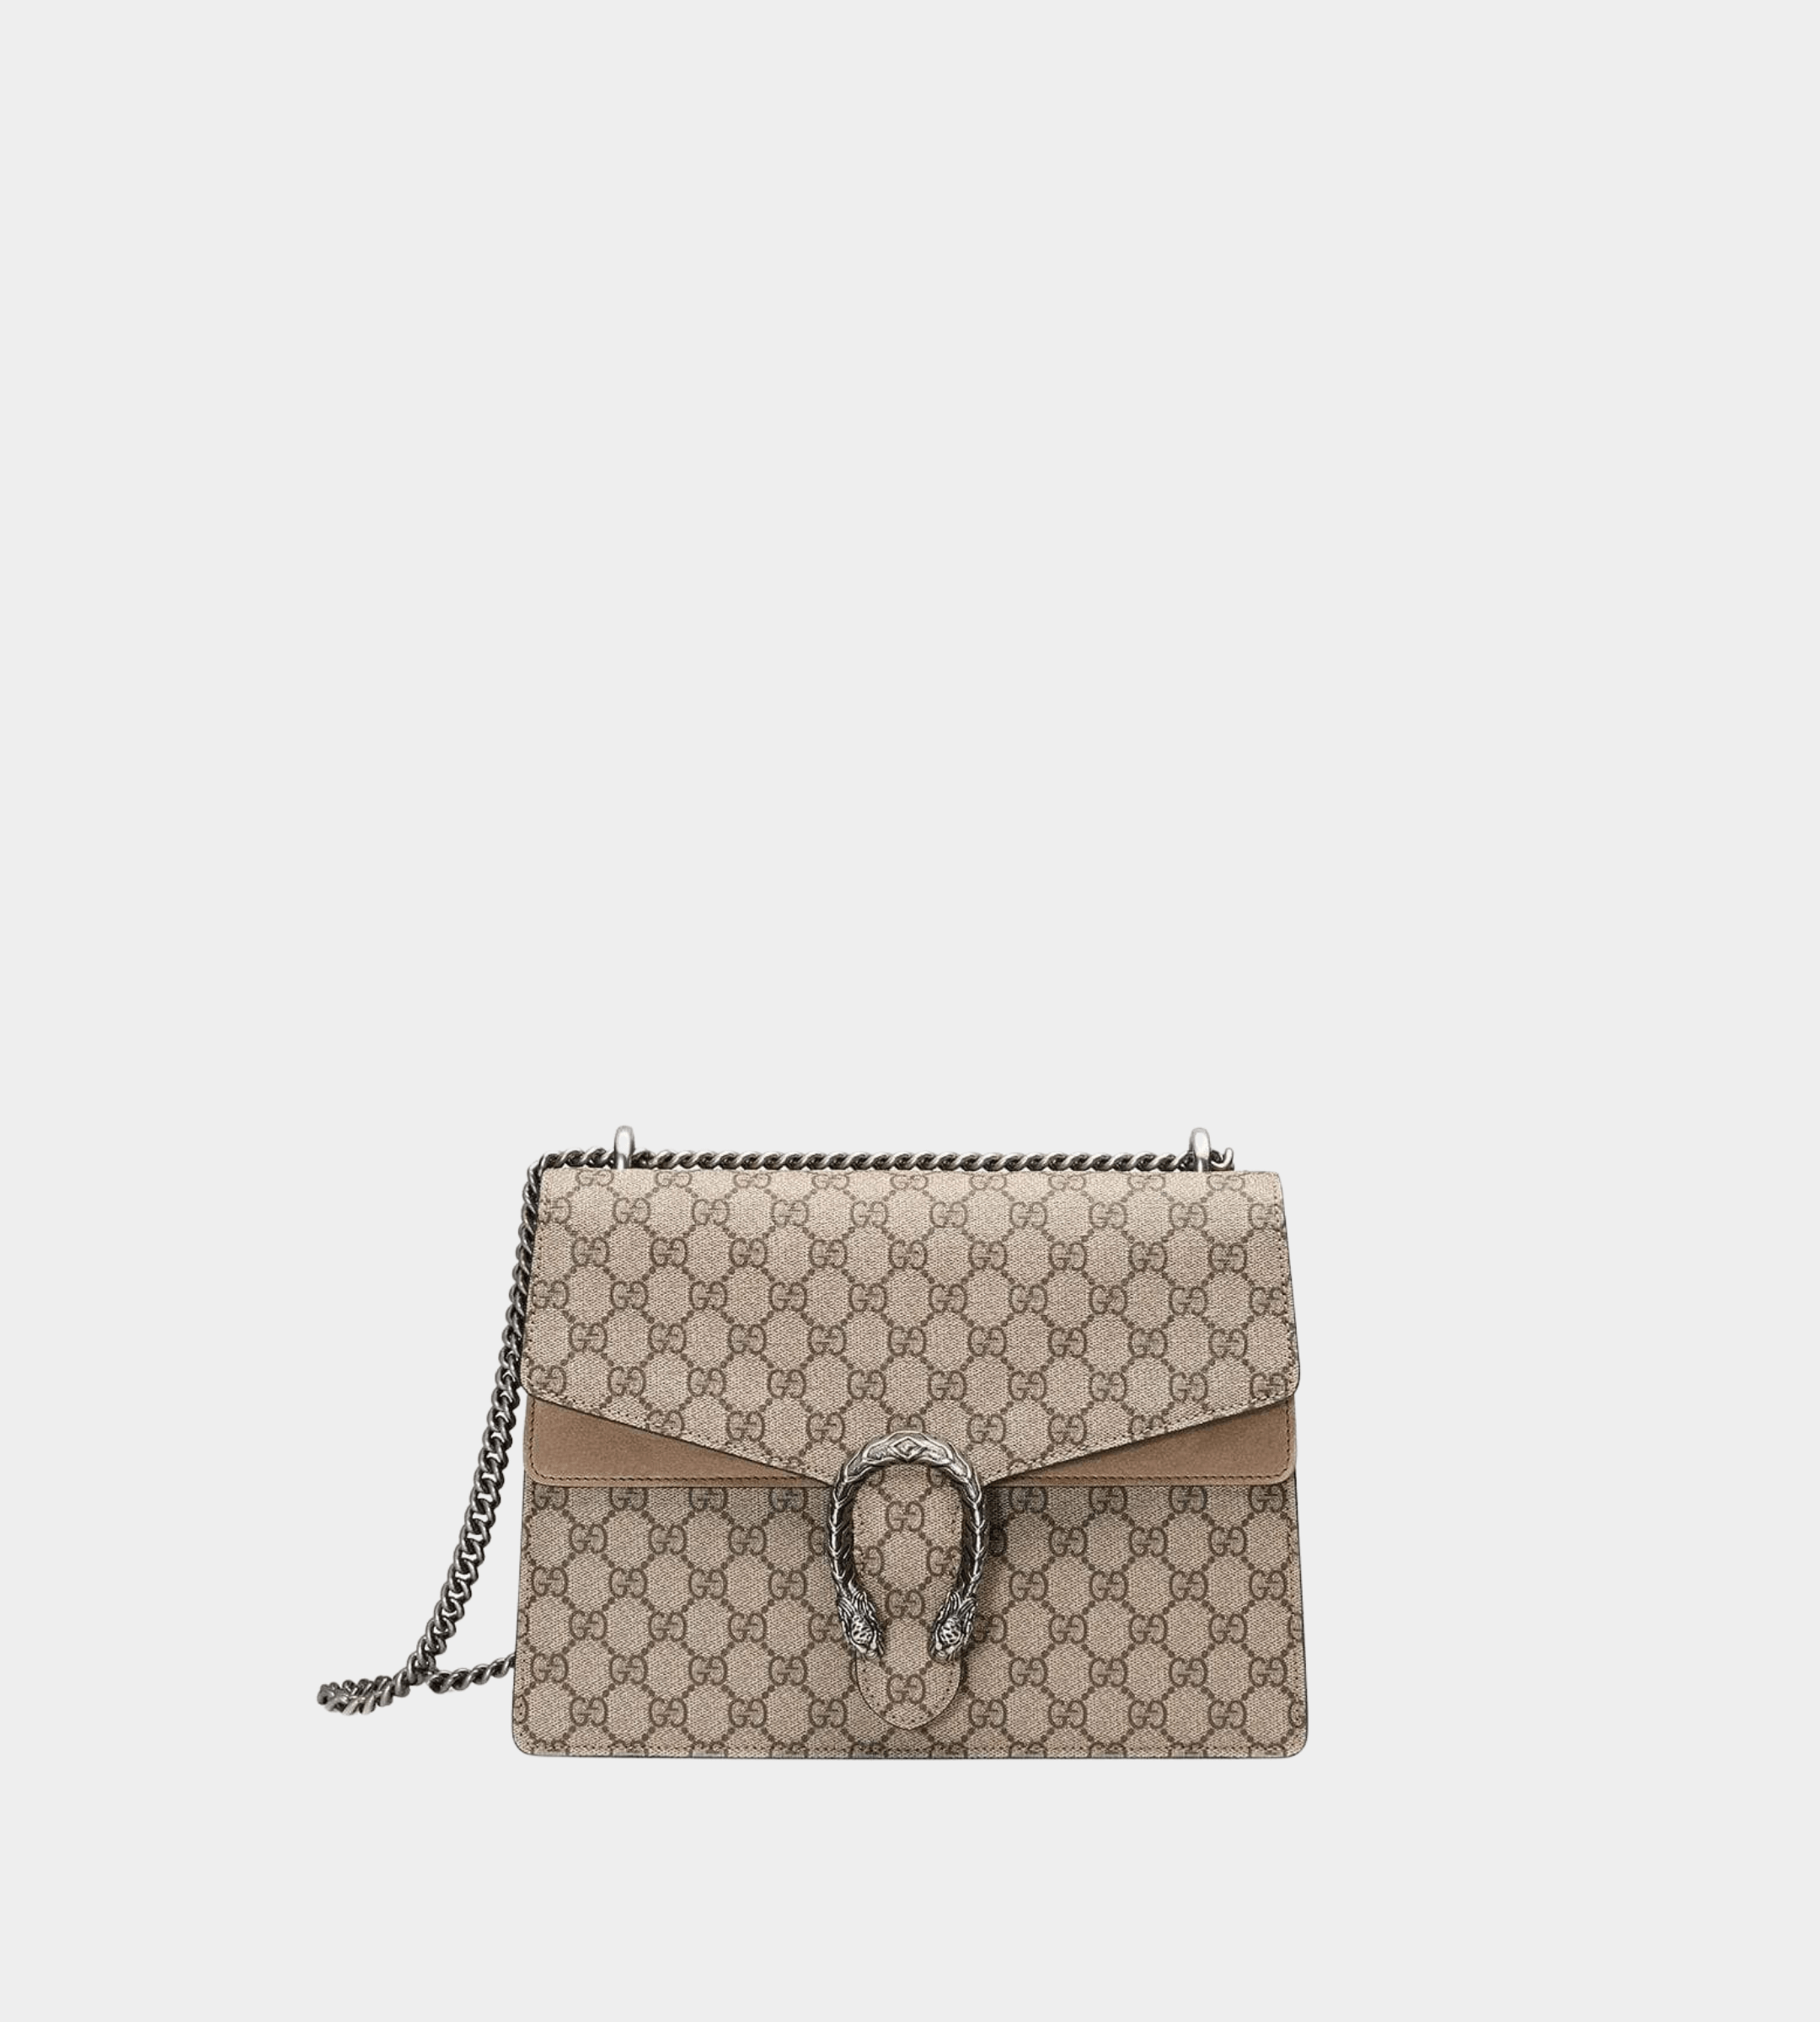 Gucci Dionysus Top Handle Medium White/Blue/Red in Calfskin Leather/Nylon  with Aged Gold-tone - US